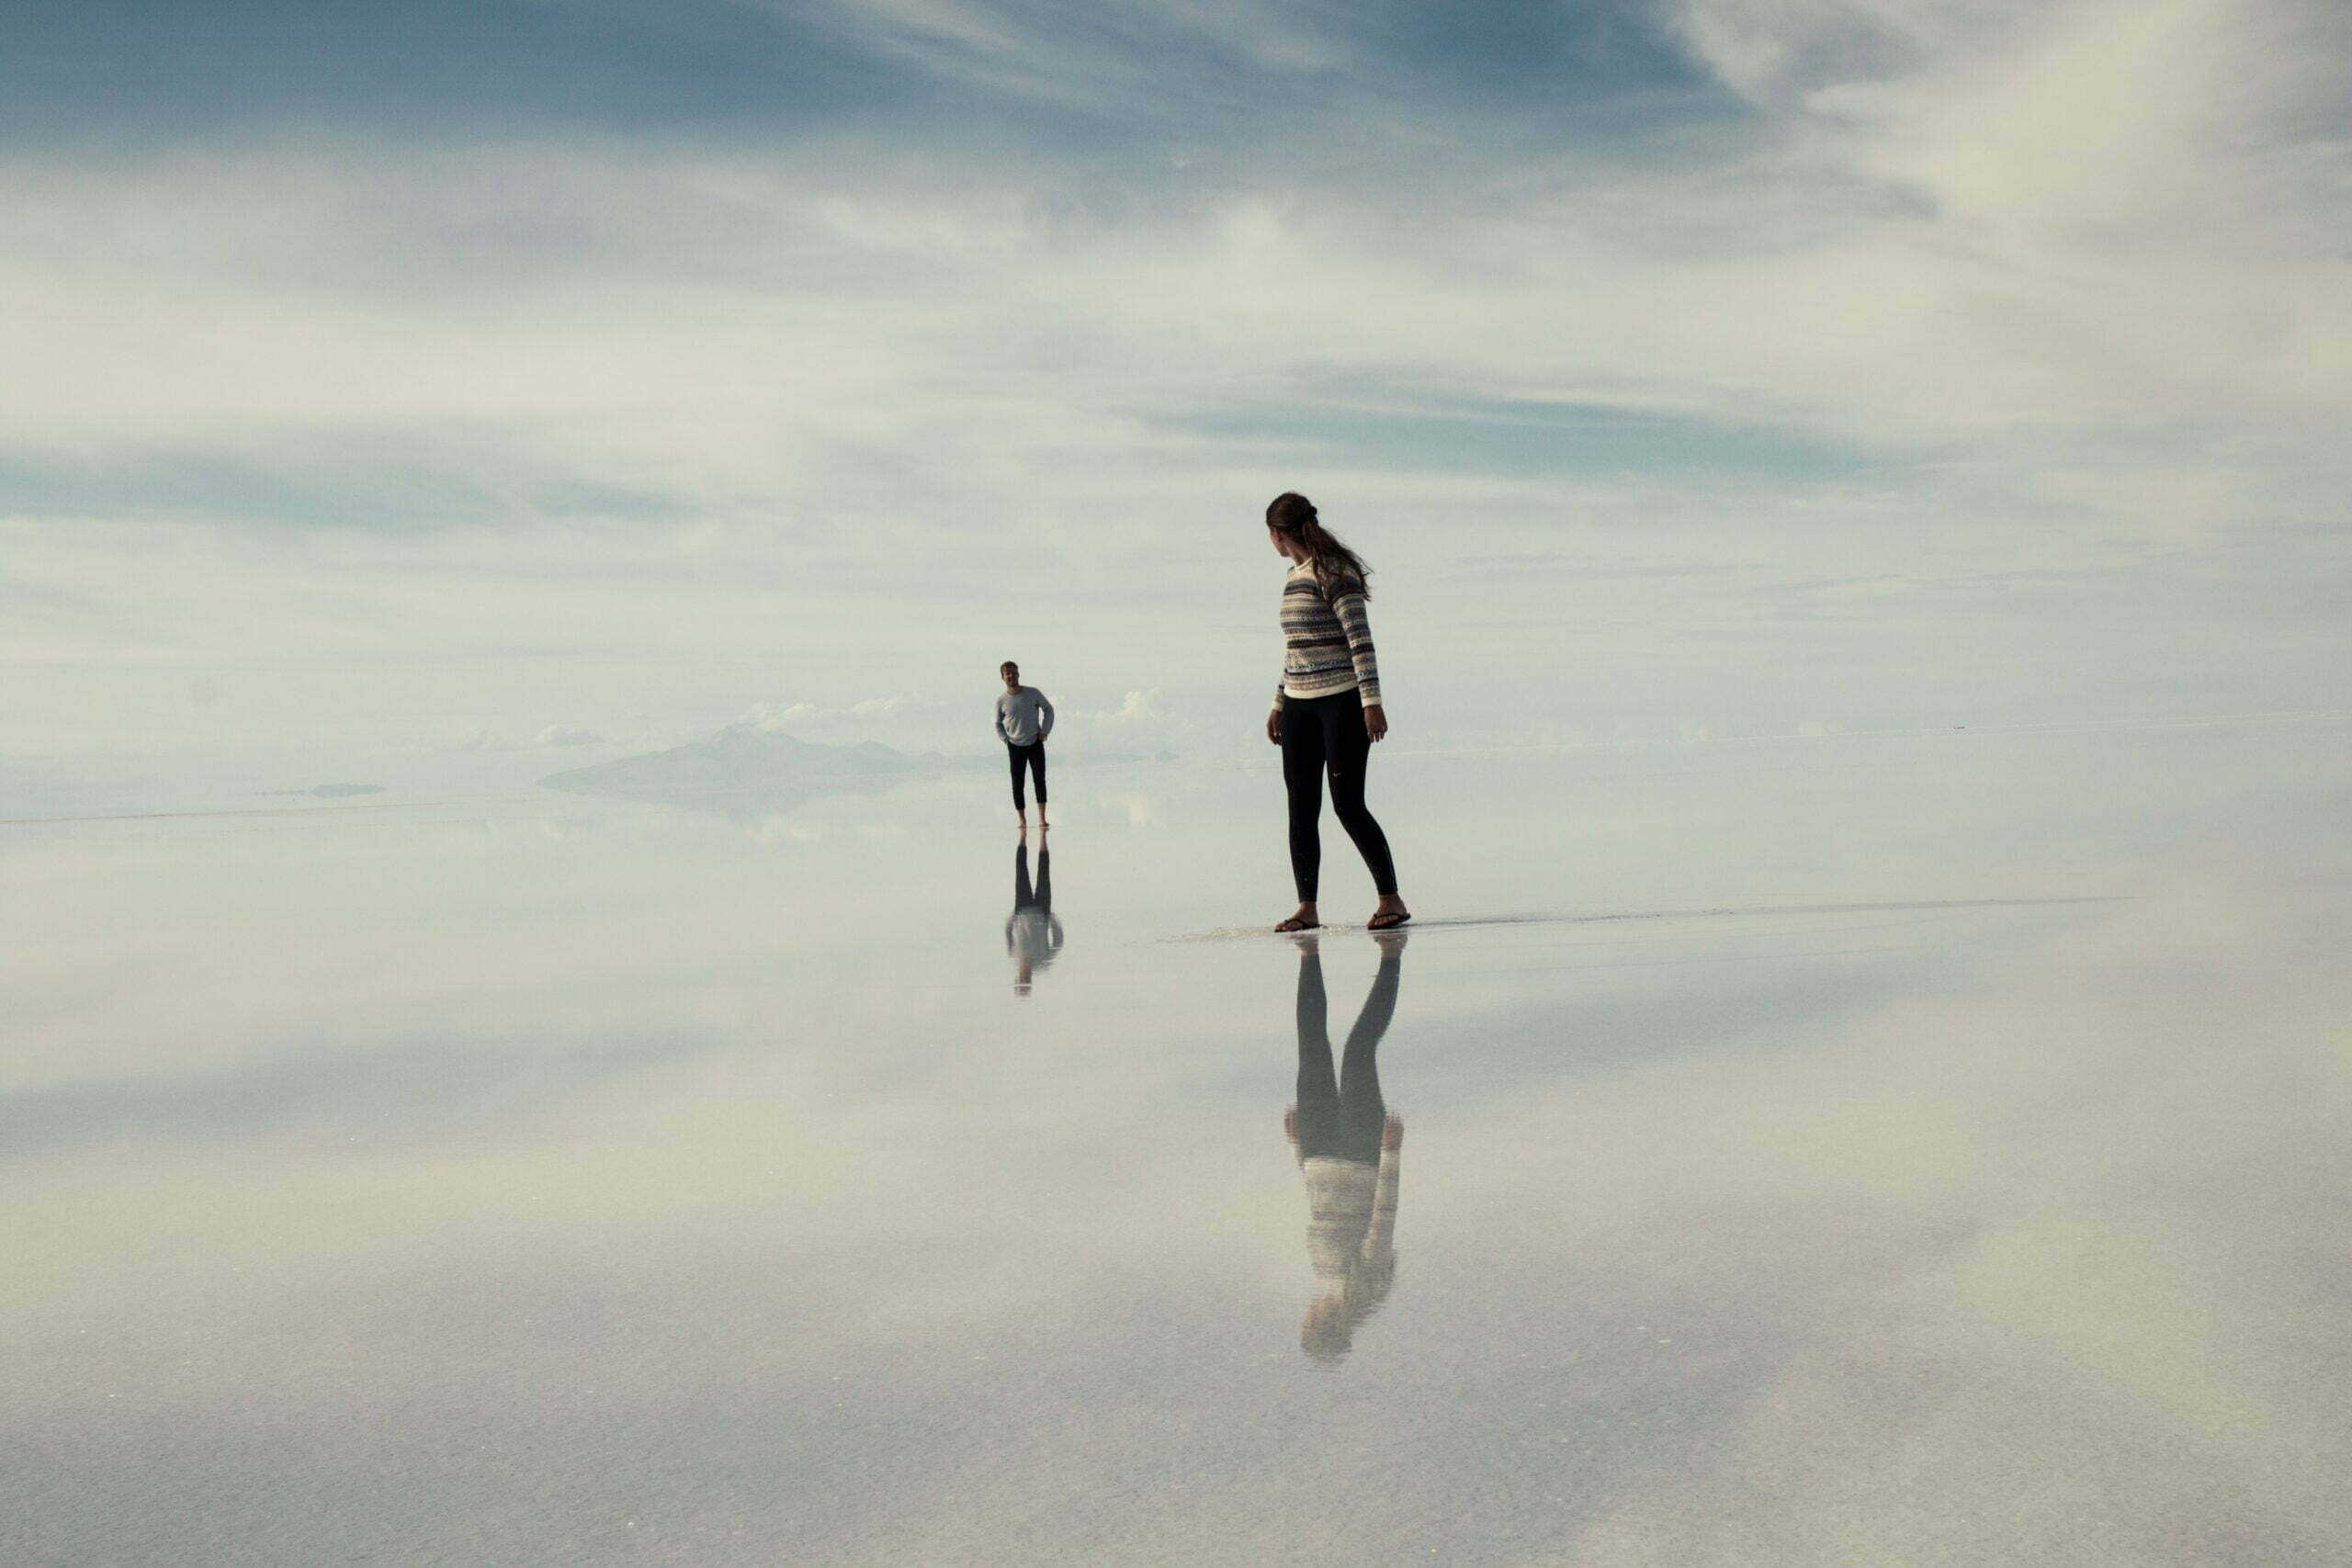 two people on beach with wet sand reflecting clouds above for mindset in business article